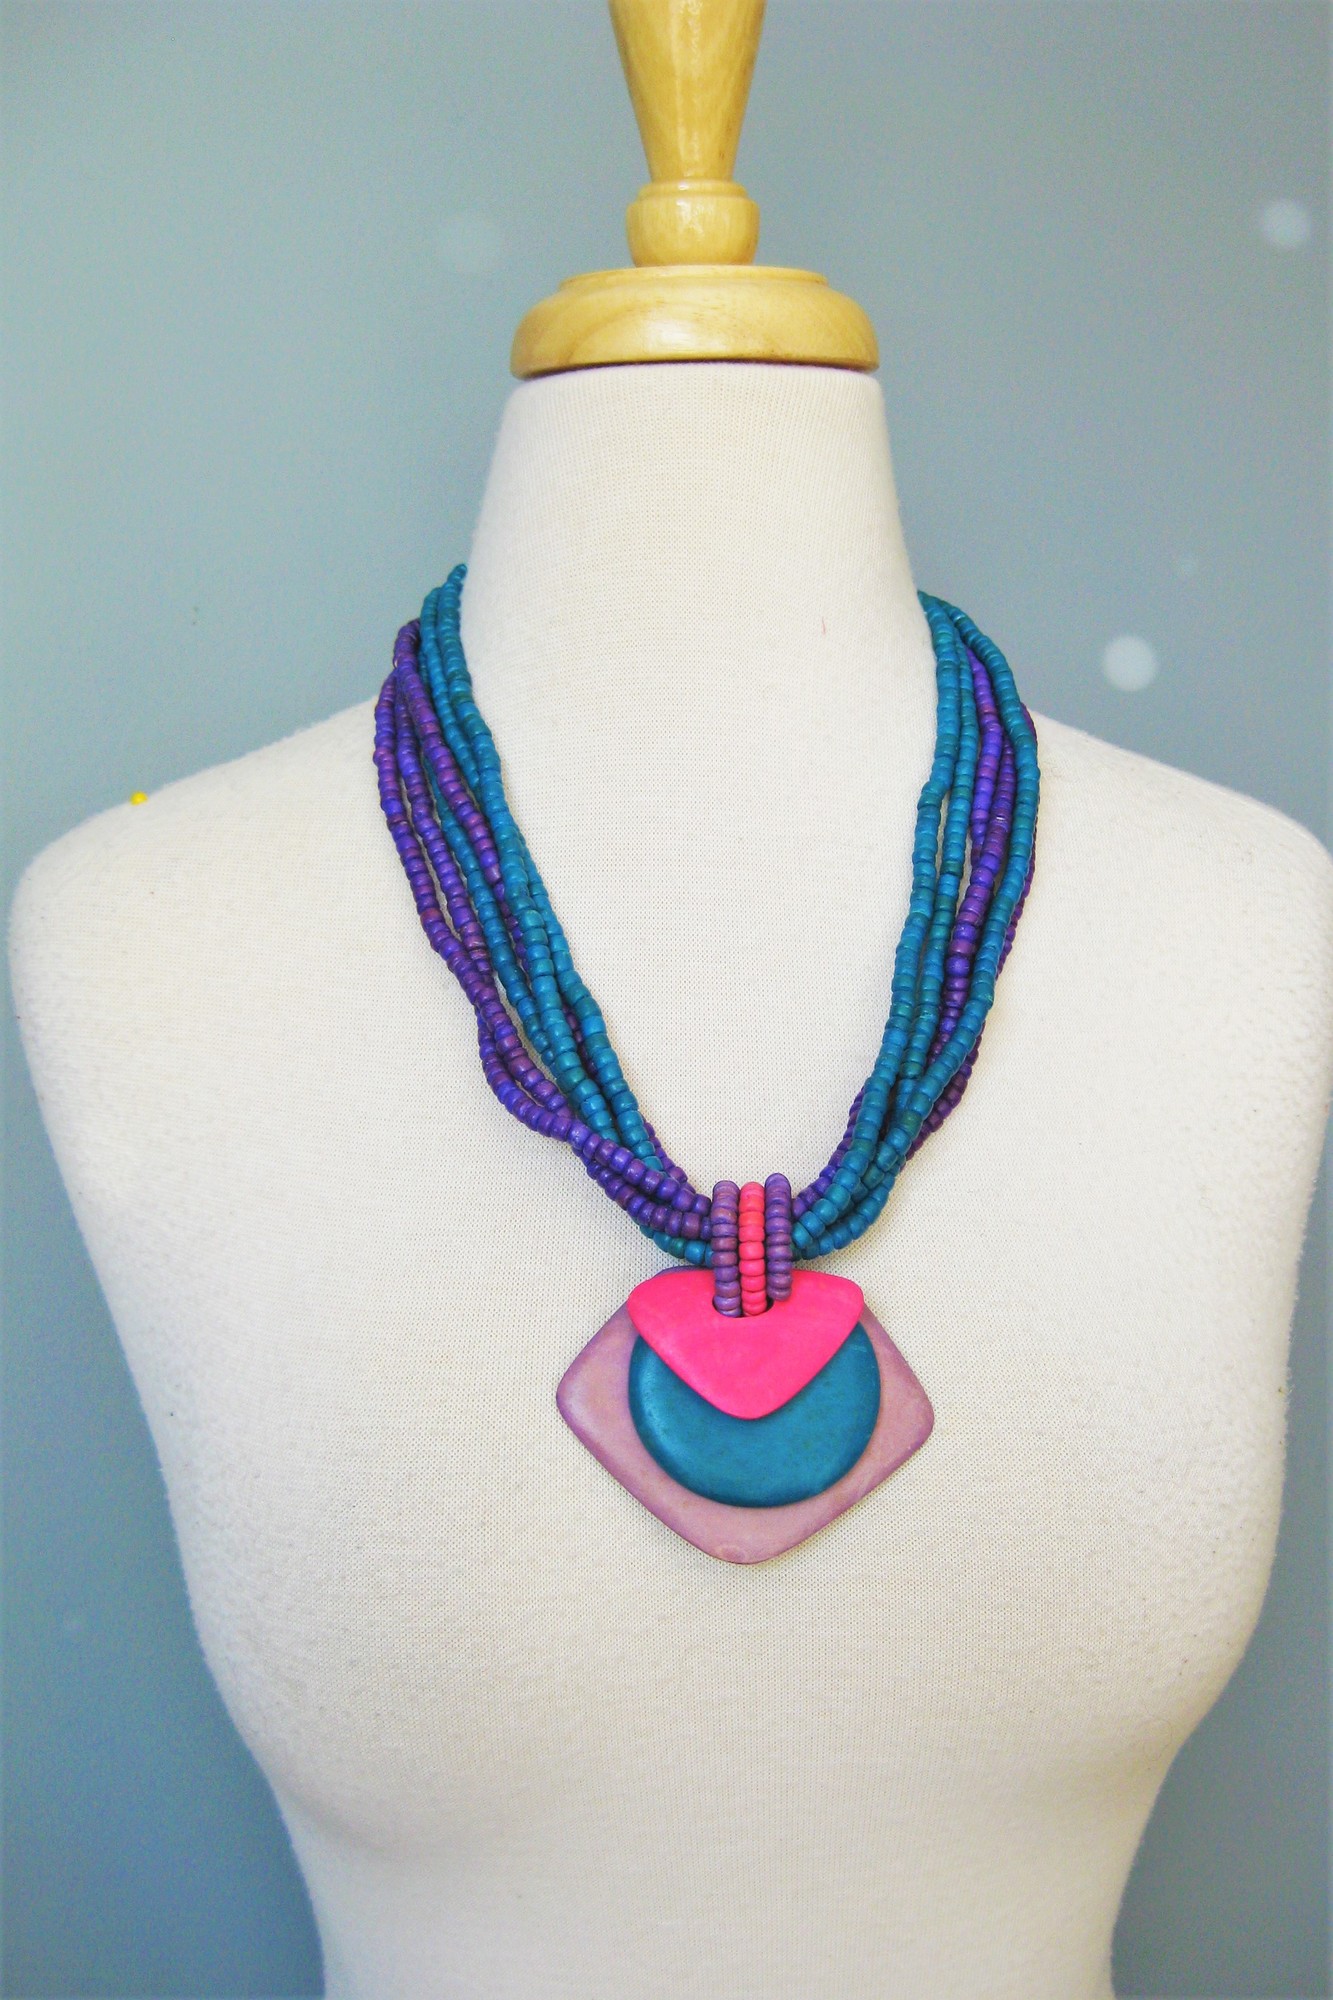 Multistrand Wood Pendant, Purple, Size: None
Quintessental 80s necklace.
You would have worn this to work over a perfectly matching big shouldered silky patterned dress.
It's a multistand pendant necklace with small teal and purple beads and a semi tribal looking pectoral pendant in pink, teal and lavender layers.
All wood.

23in long
closes with a hook
thanks for looking!
#40102